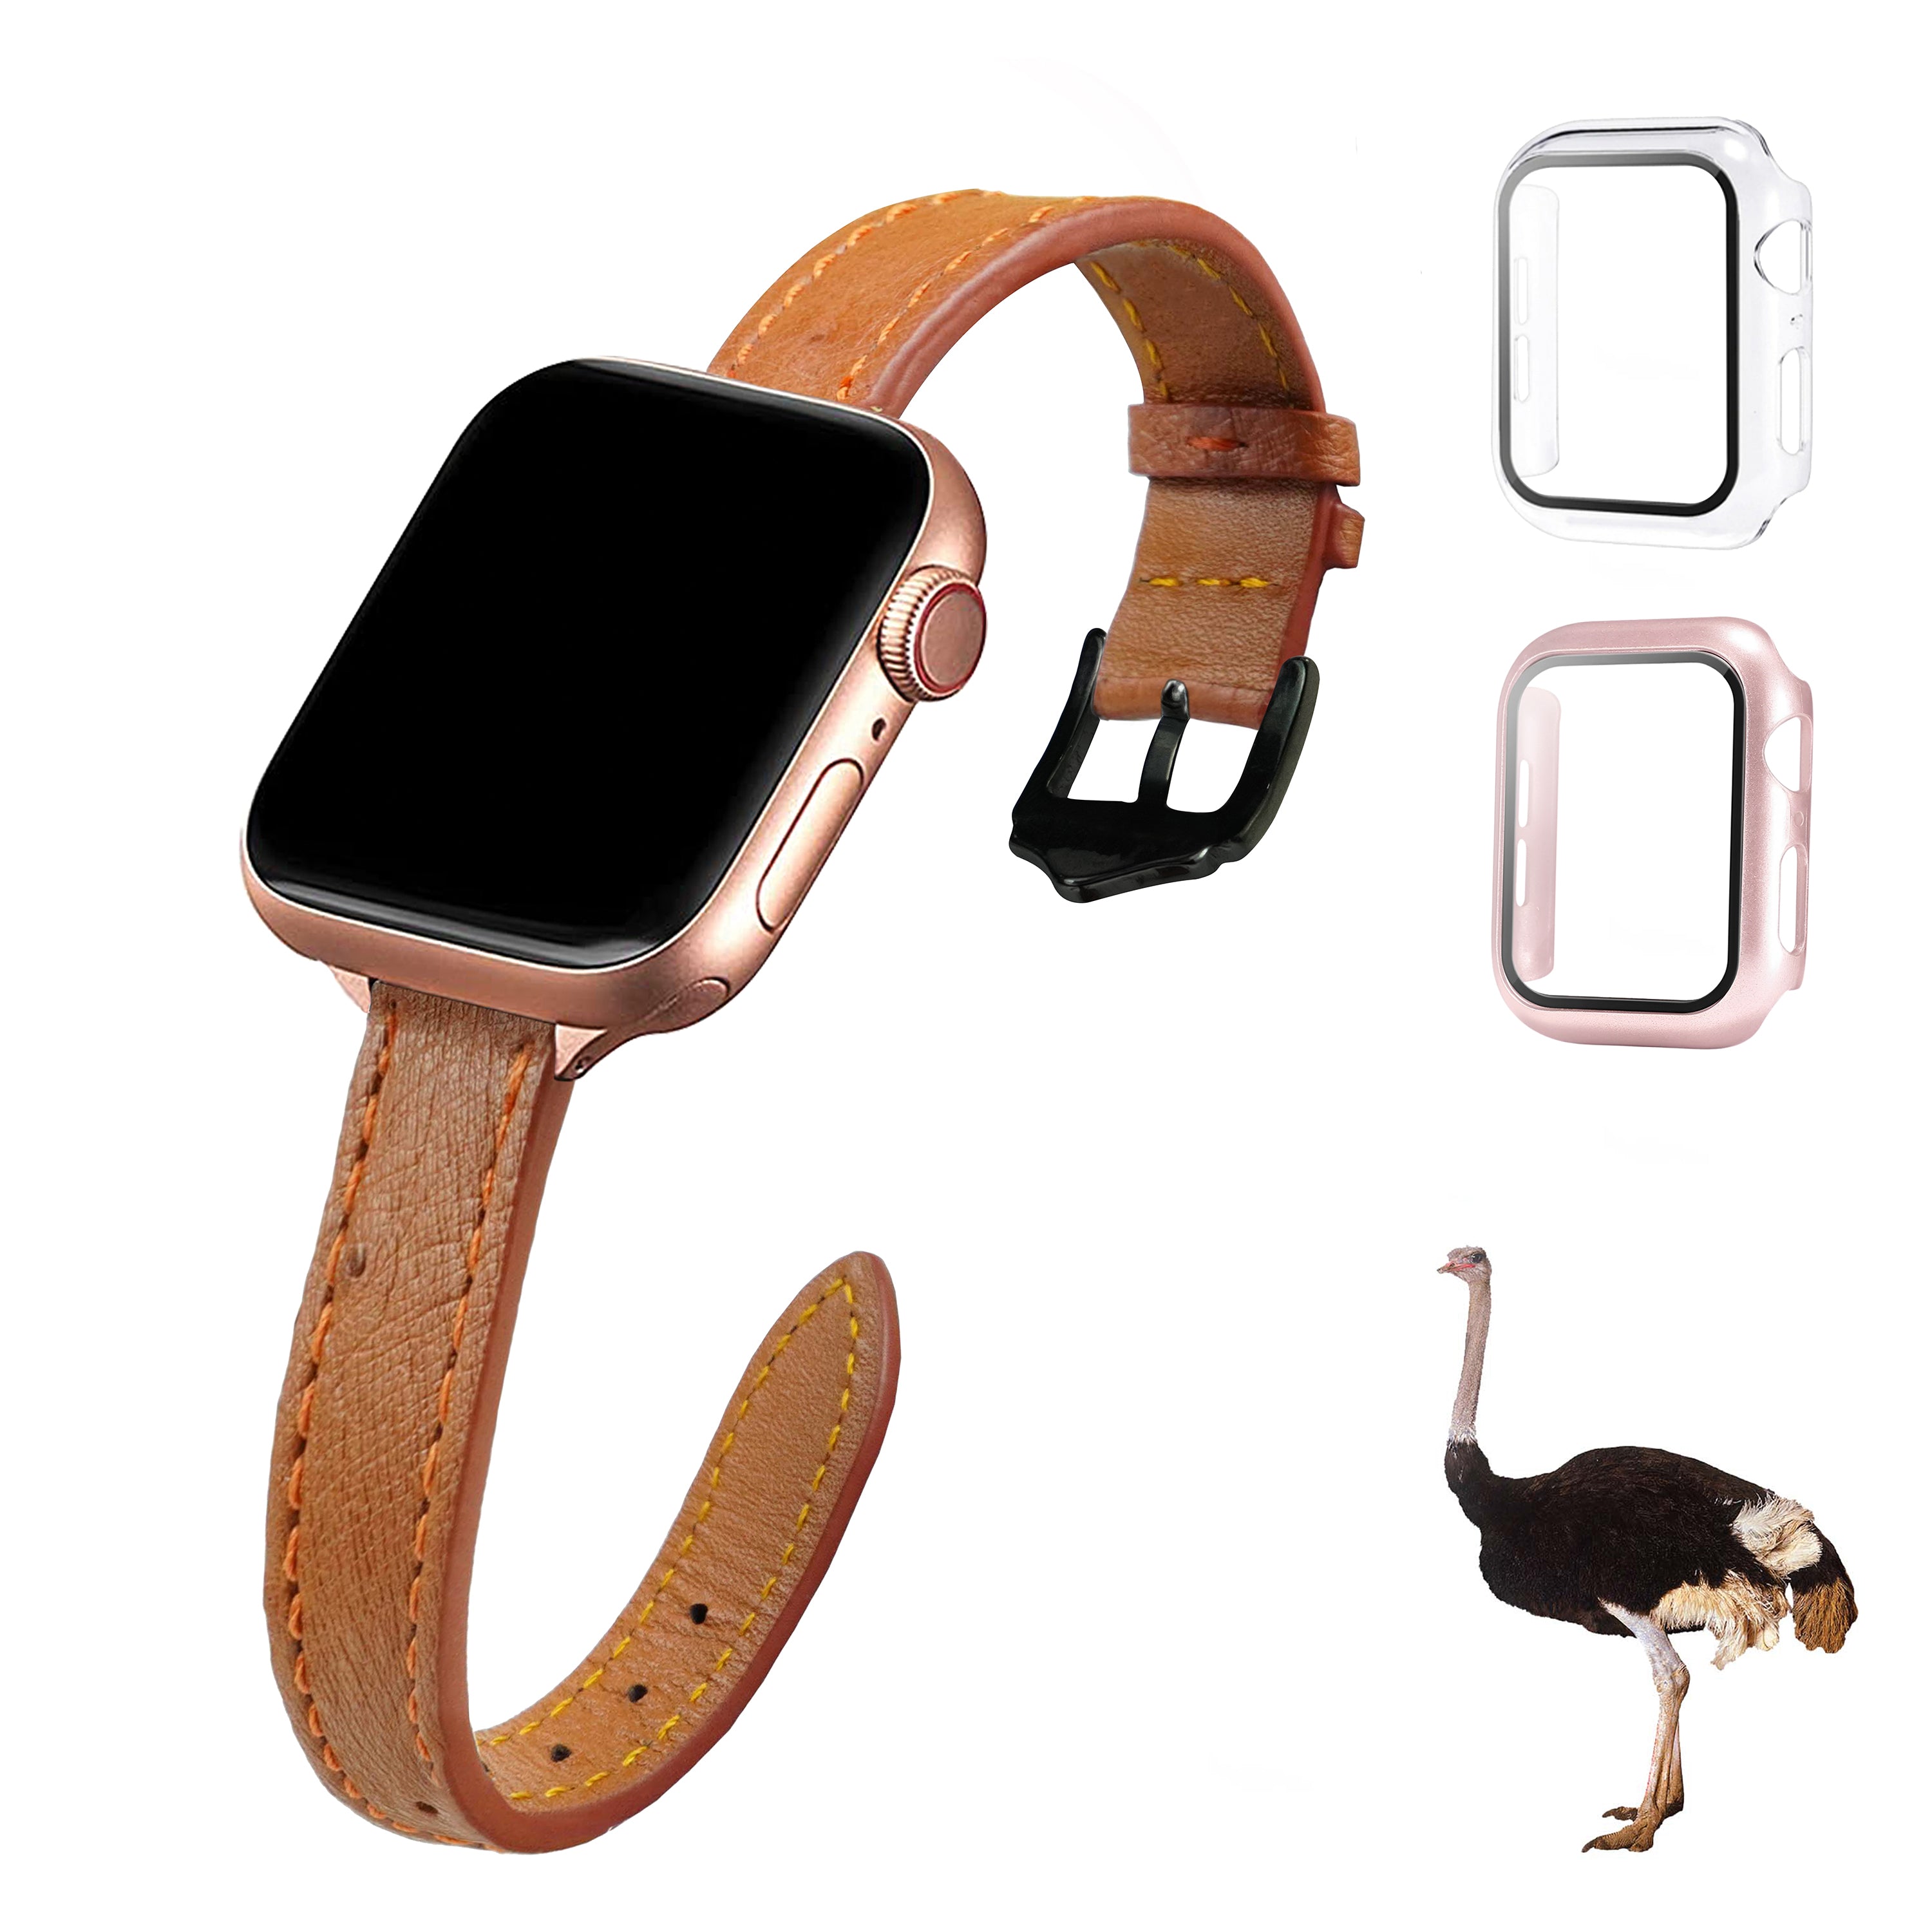 Light Brown Flat Ostrich Leather Band Compatible Apple Watch Iwatch 38mm Screen Protector Case Black Adapter Replacement Strap For Smartwatch Series 1 2 3 Leather Handmade AW-186B-W-38MM